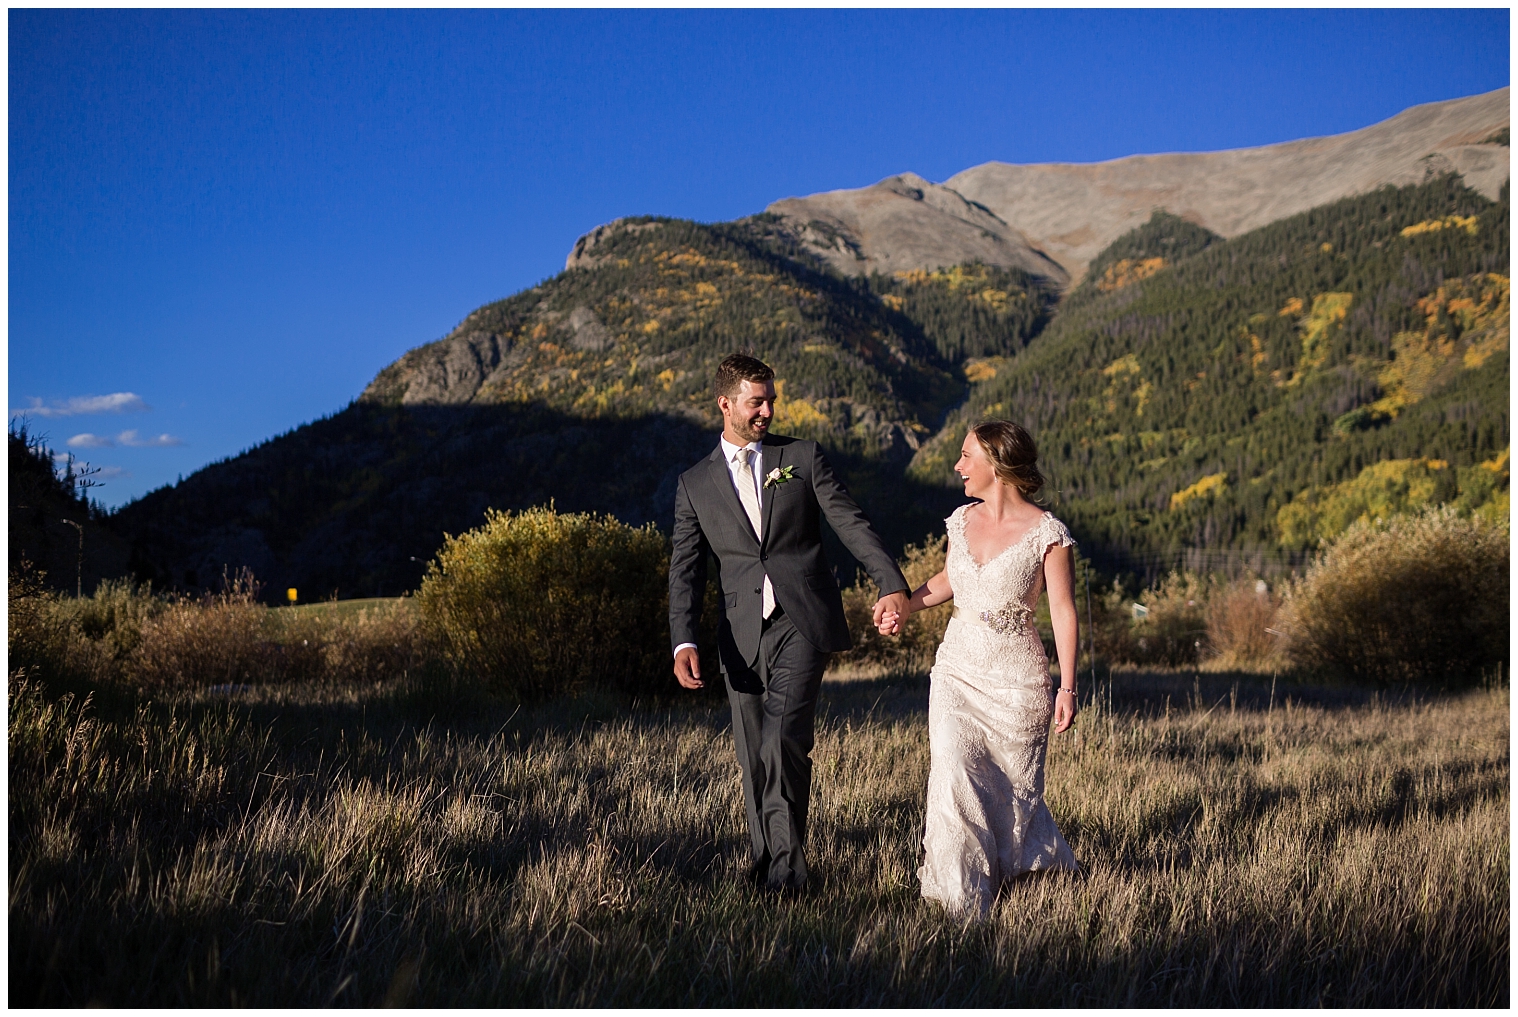 The bride and groom walk hand in hand during their Copper Mountain wedding portraits.